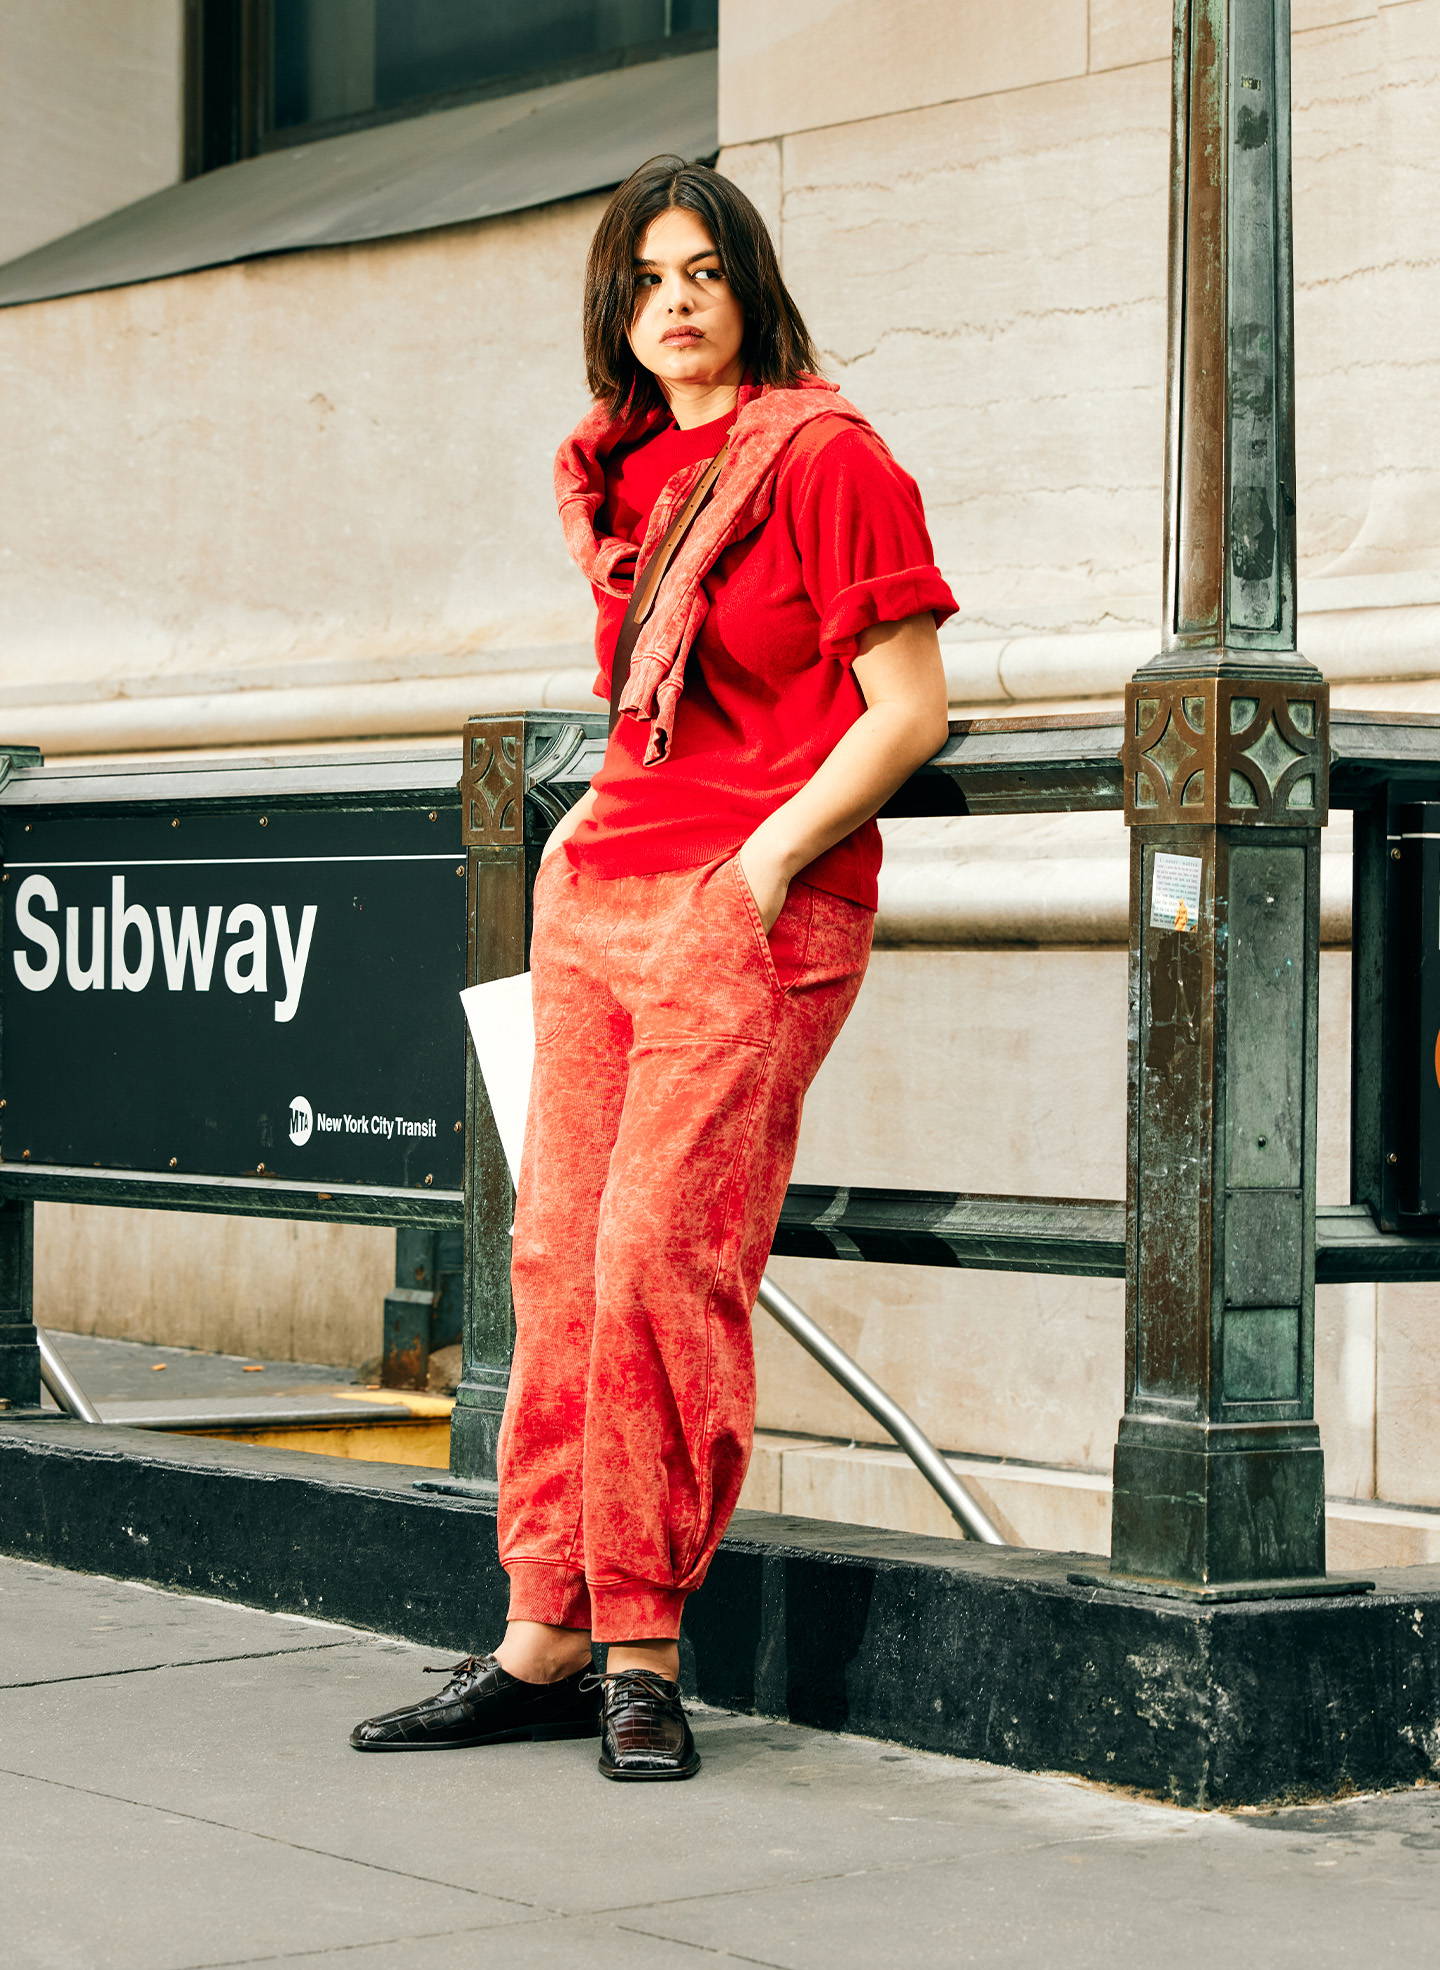 model standing in front of subway entrance